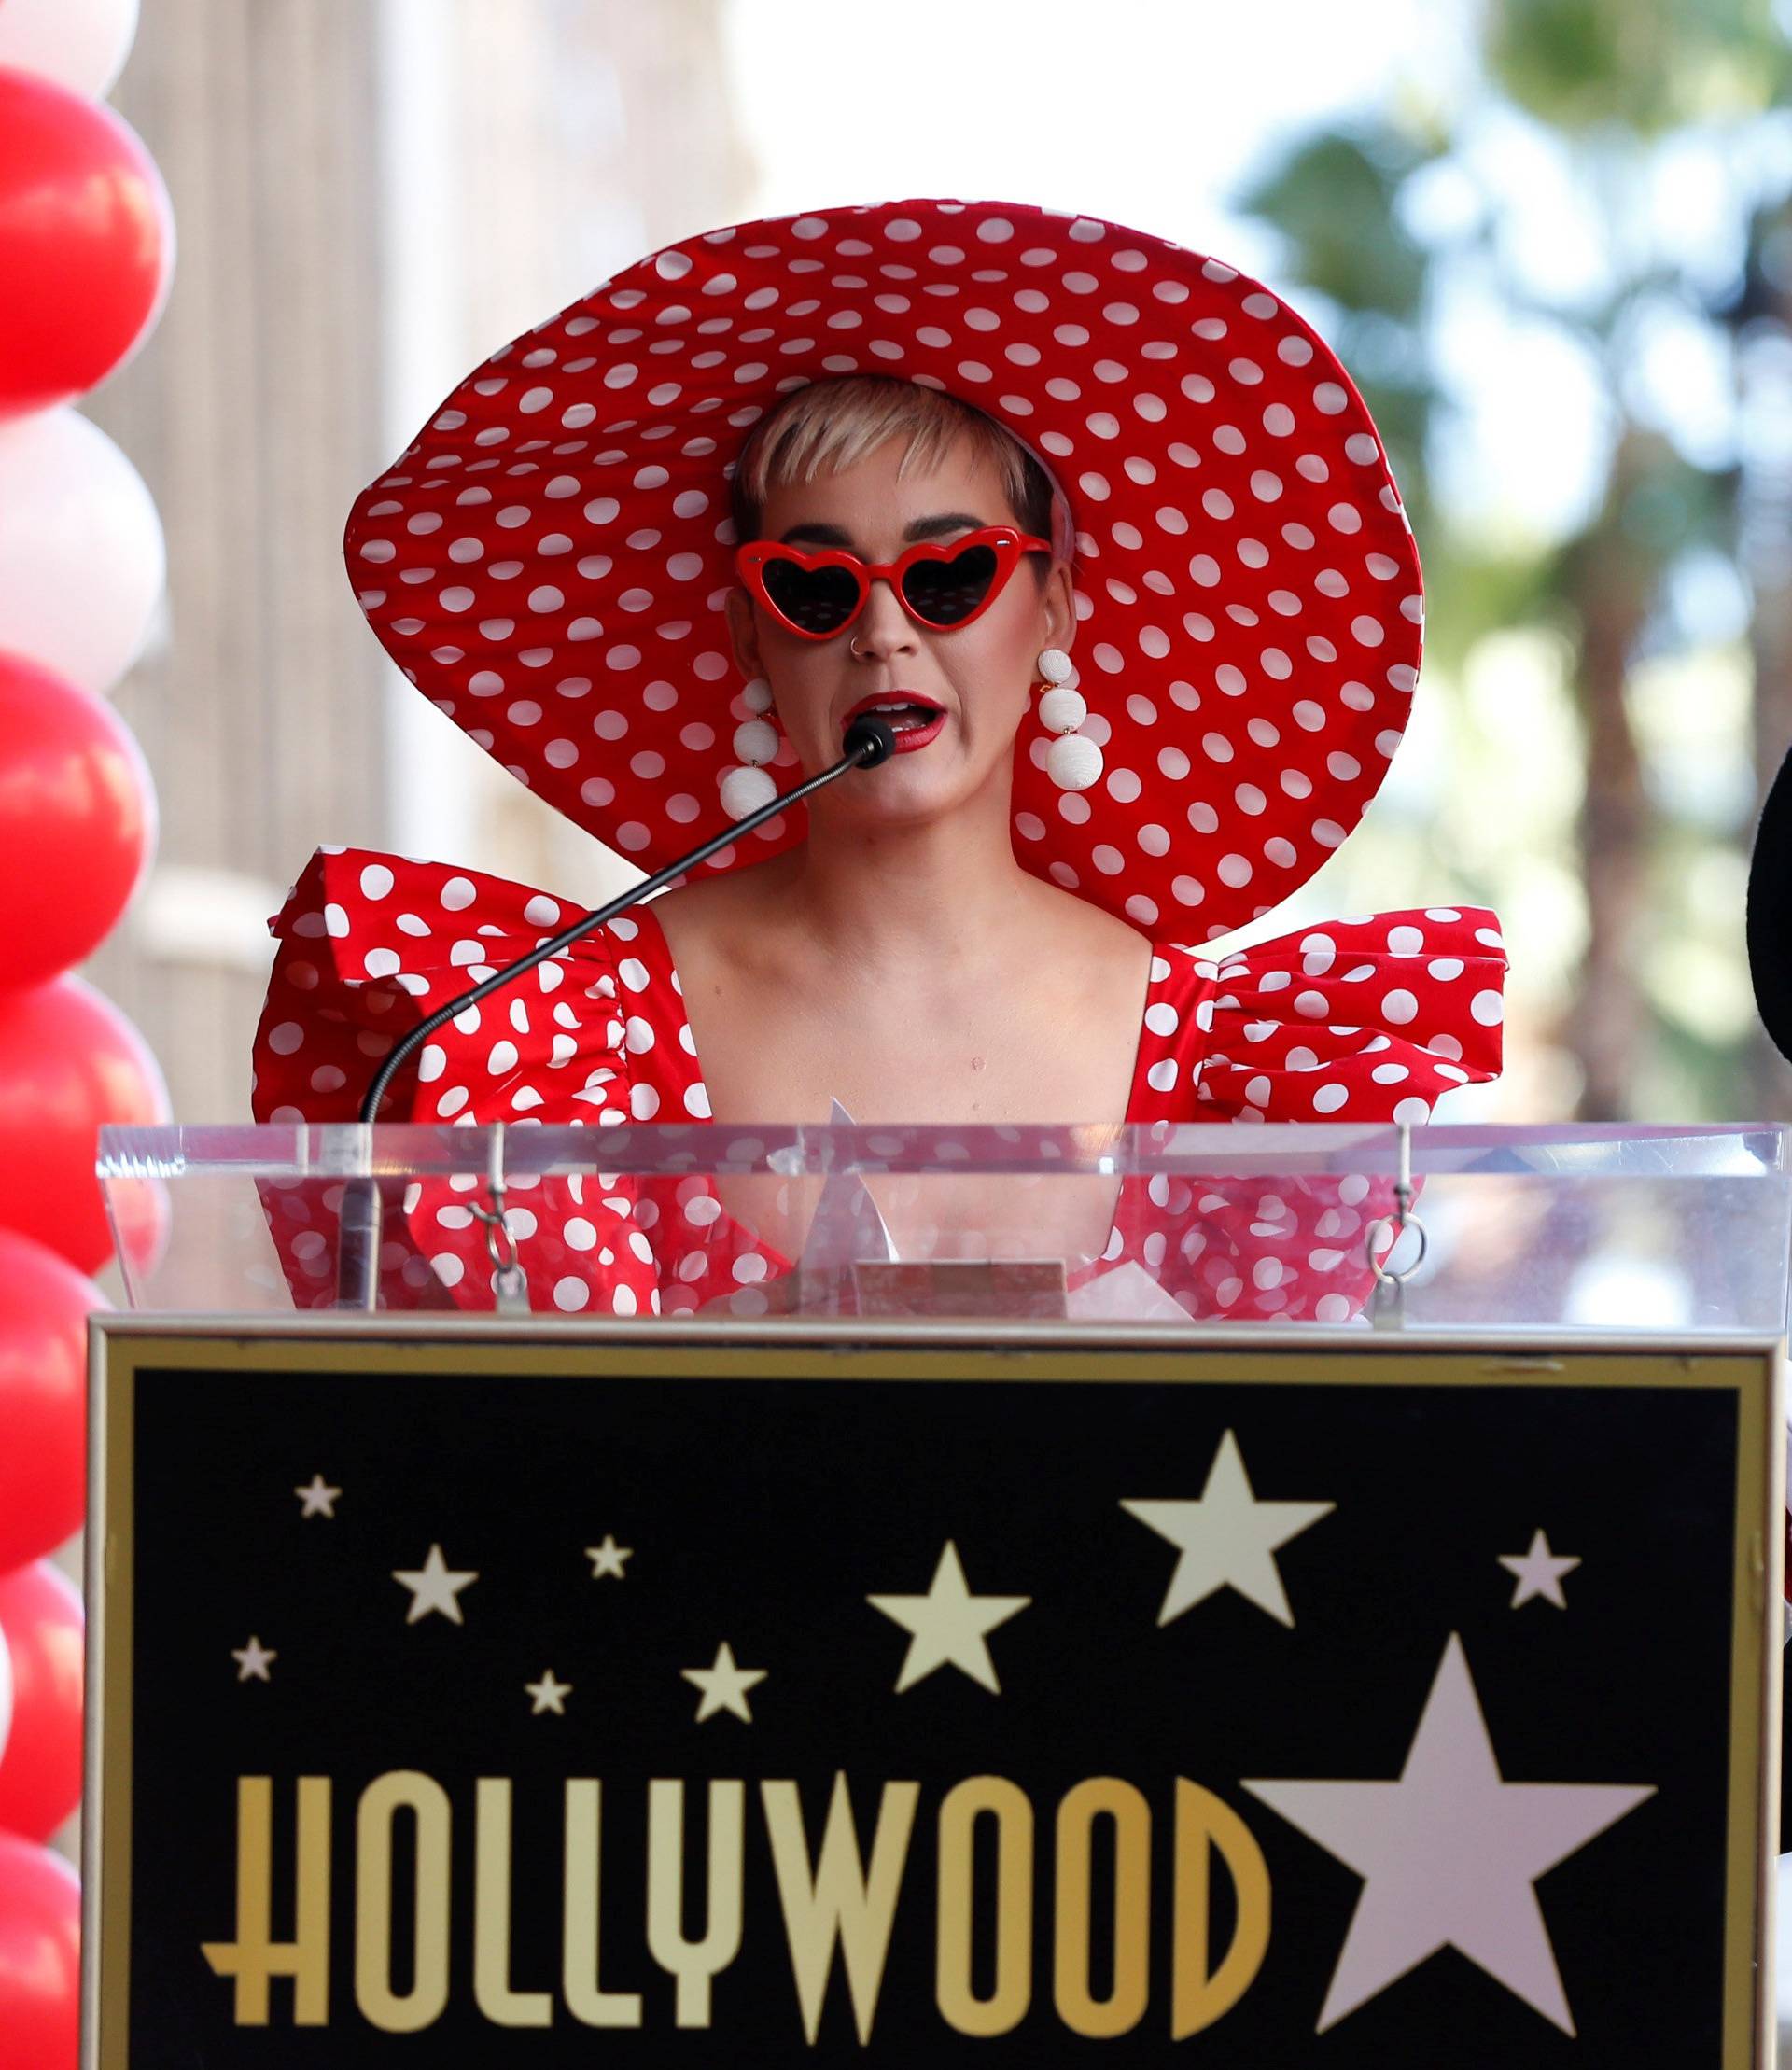 Singer Perry speaks next to the character of Minnie Mouse at the unveiling of her star on the Hollywood Walk of Fame in Los Angeles